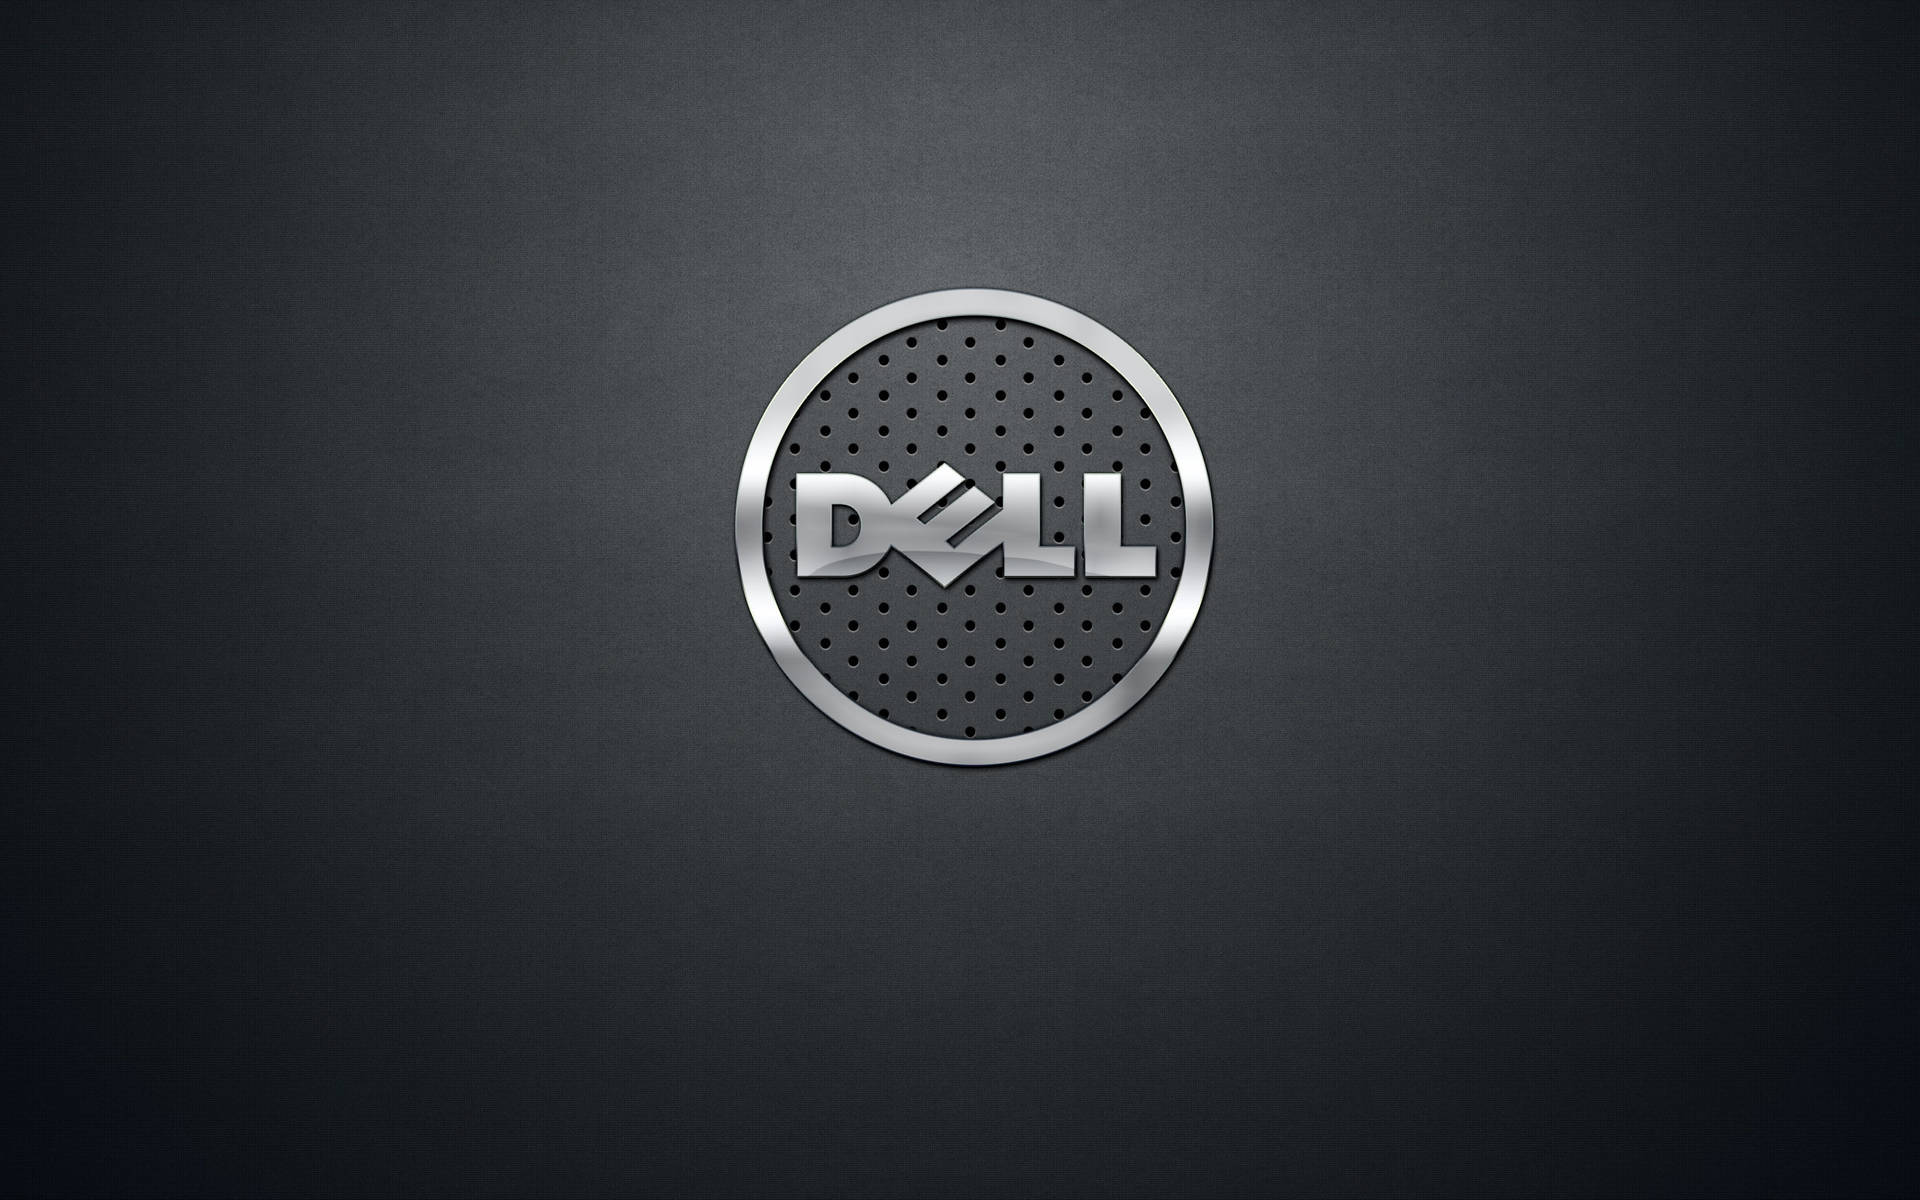 Silver Perforated Dell Laptop Logo Background